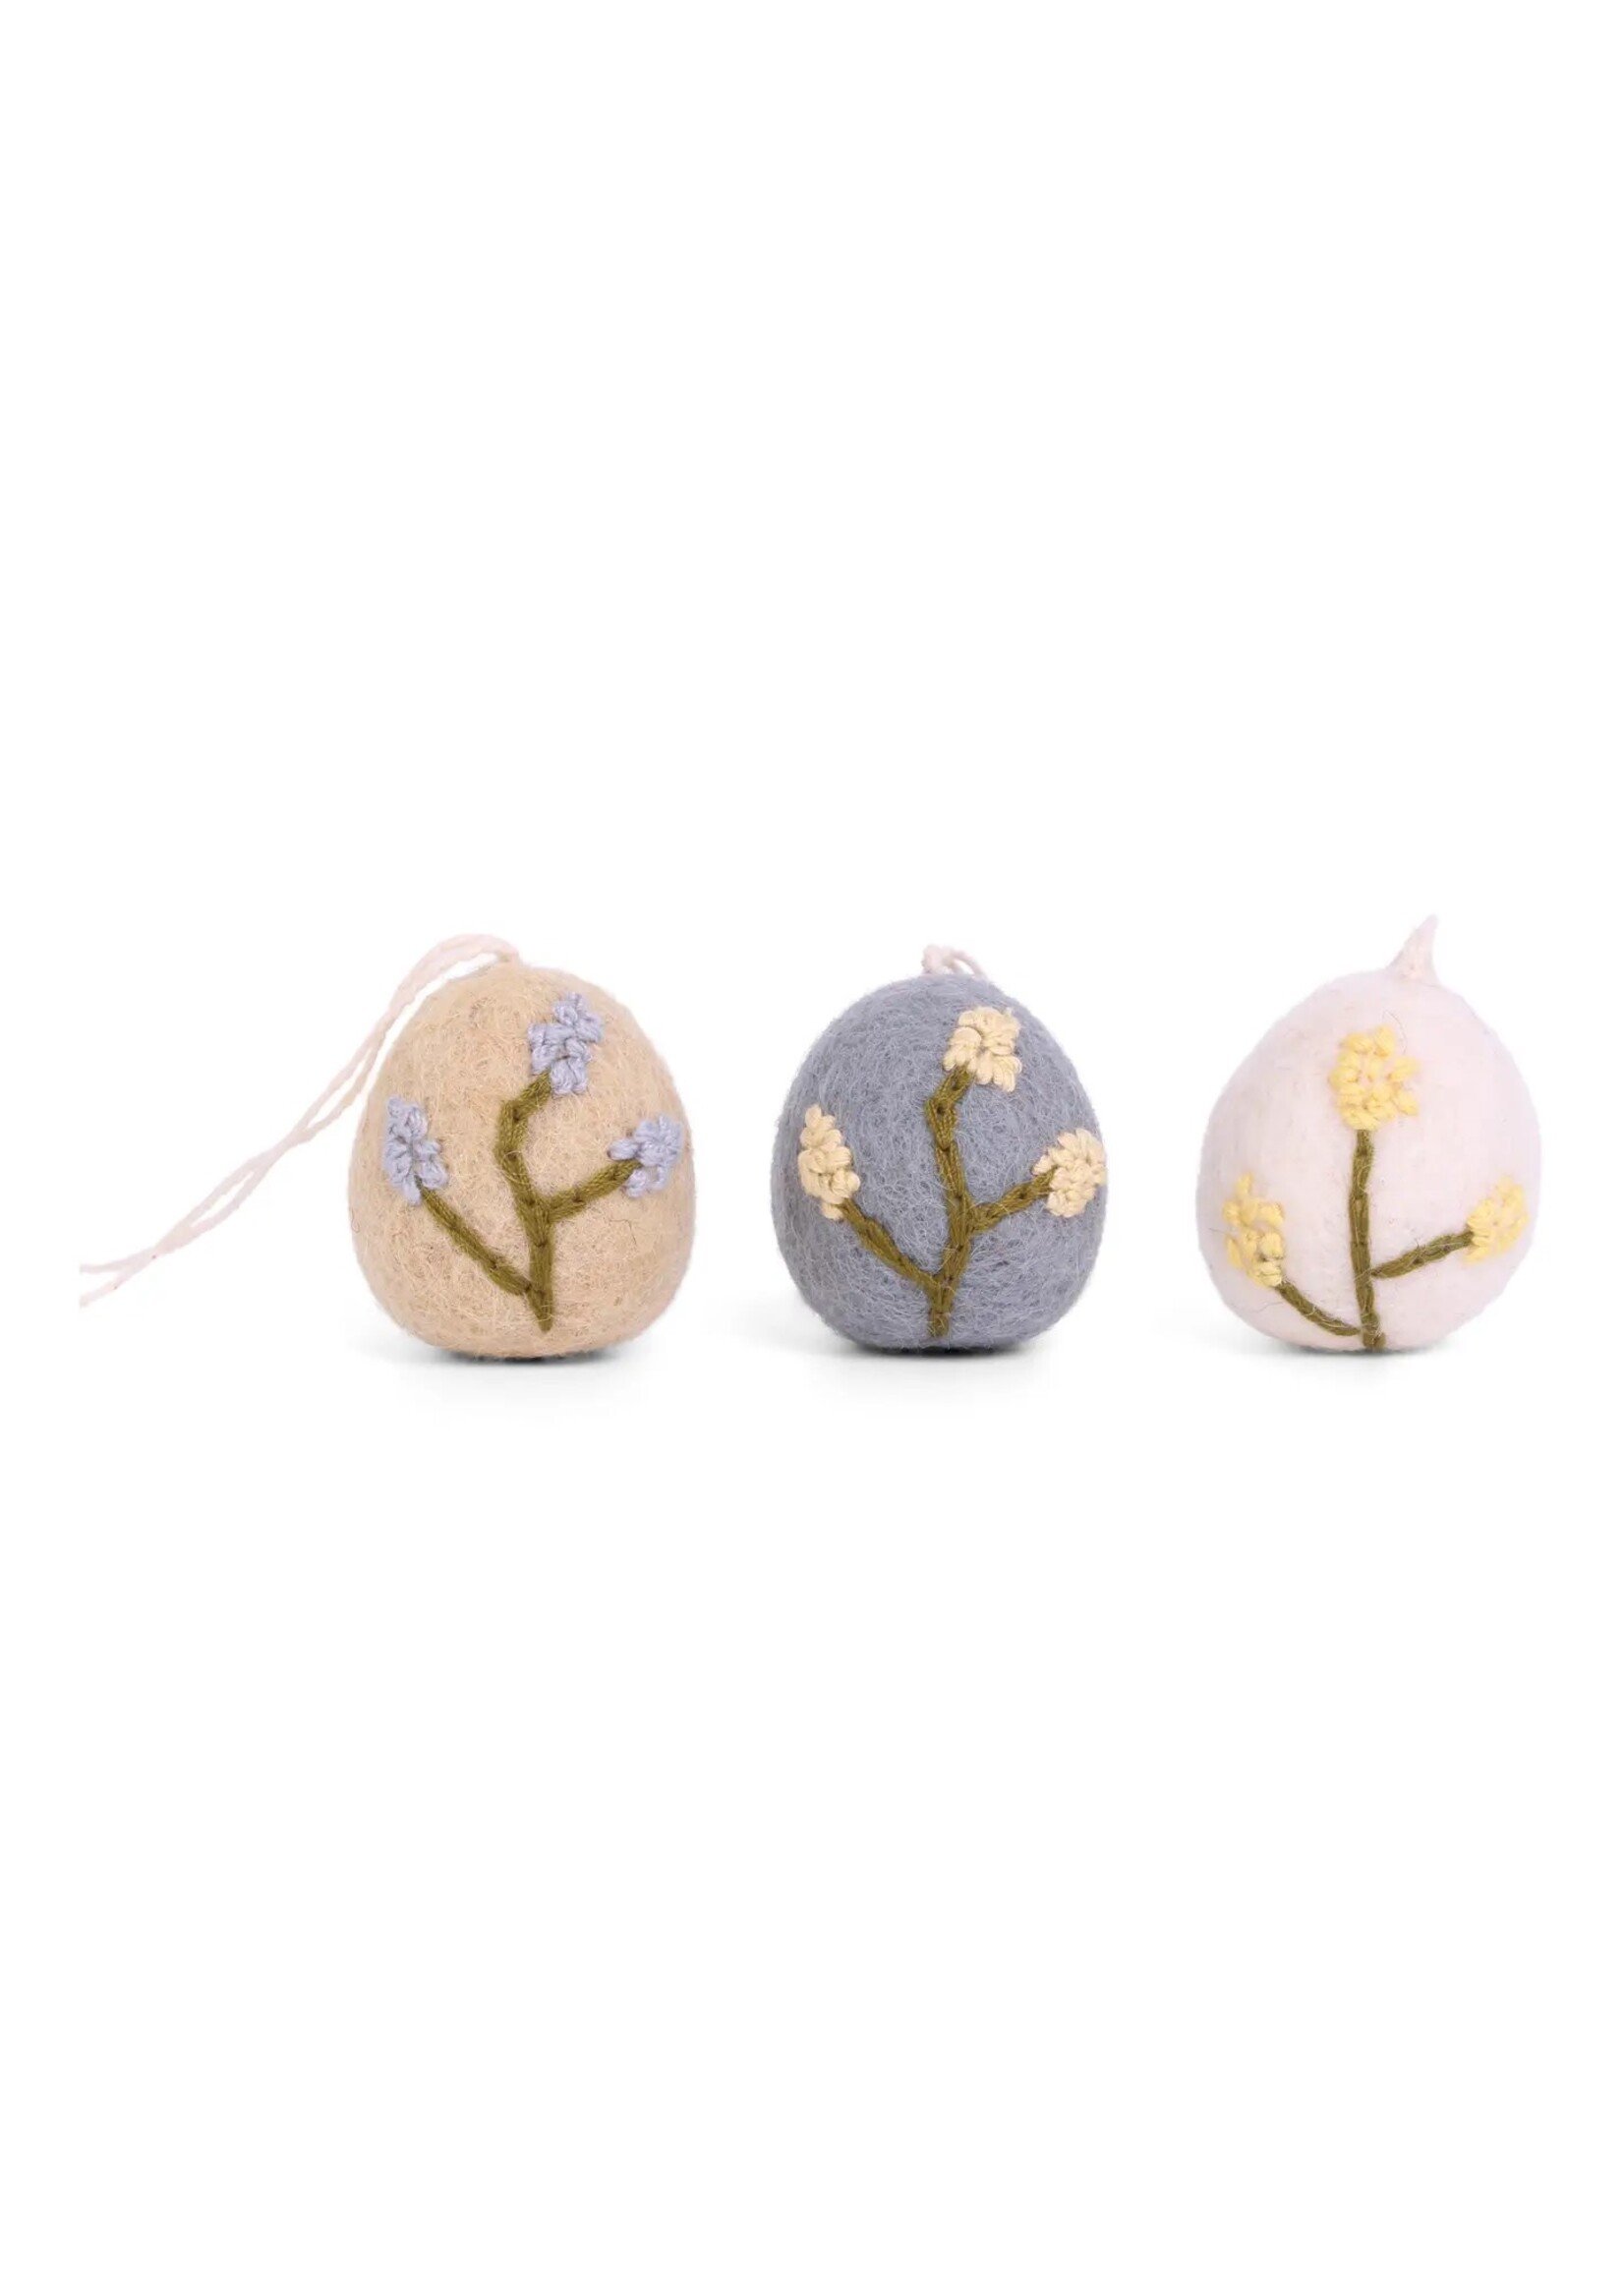 Eggs with Embroidery - Heather - Set of 3